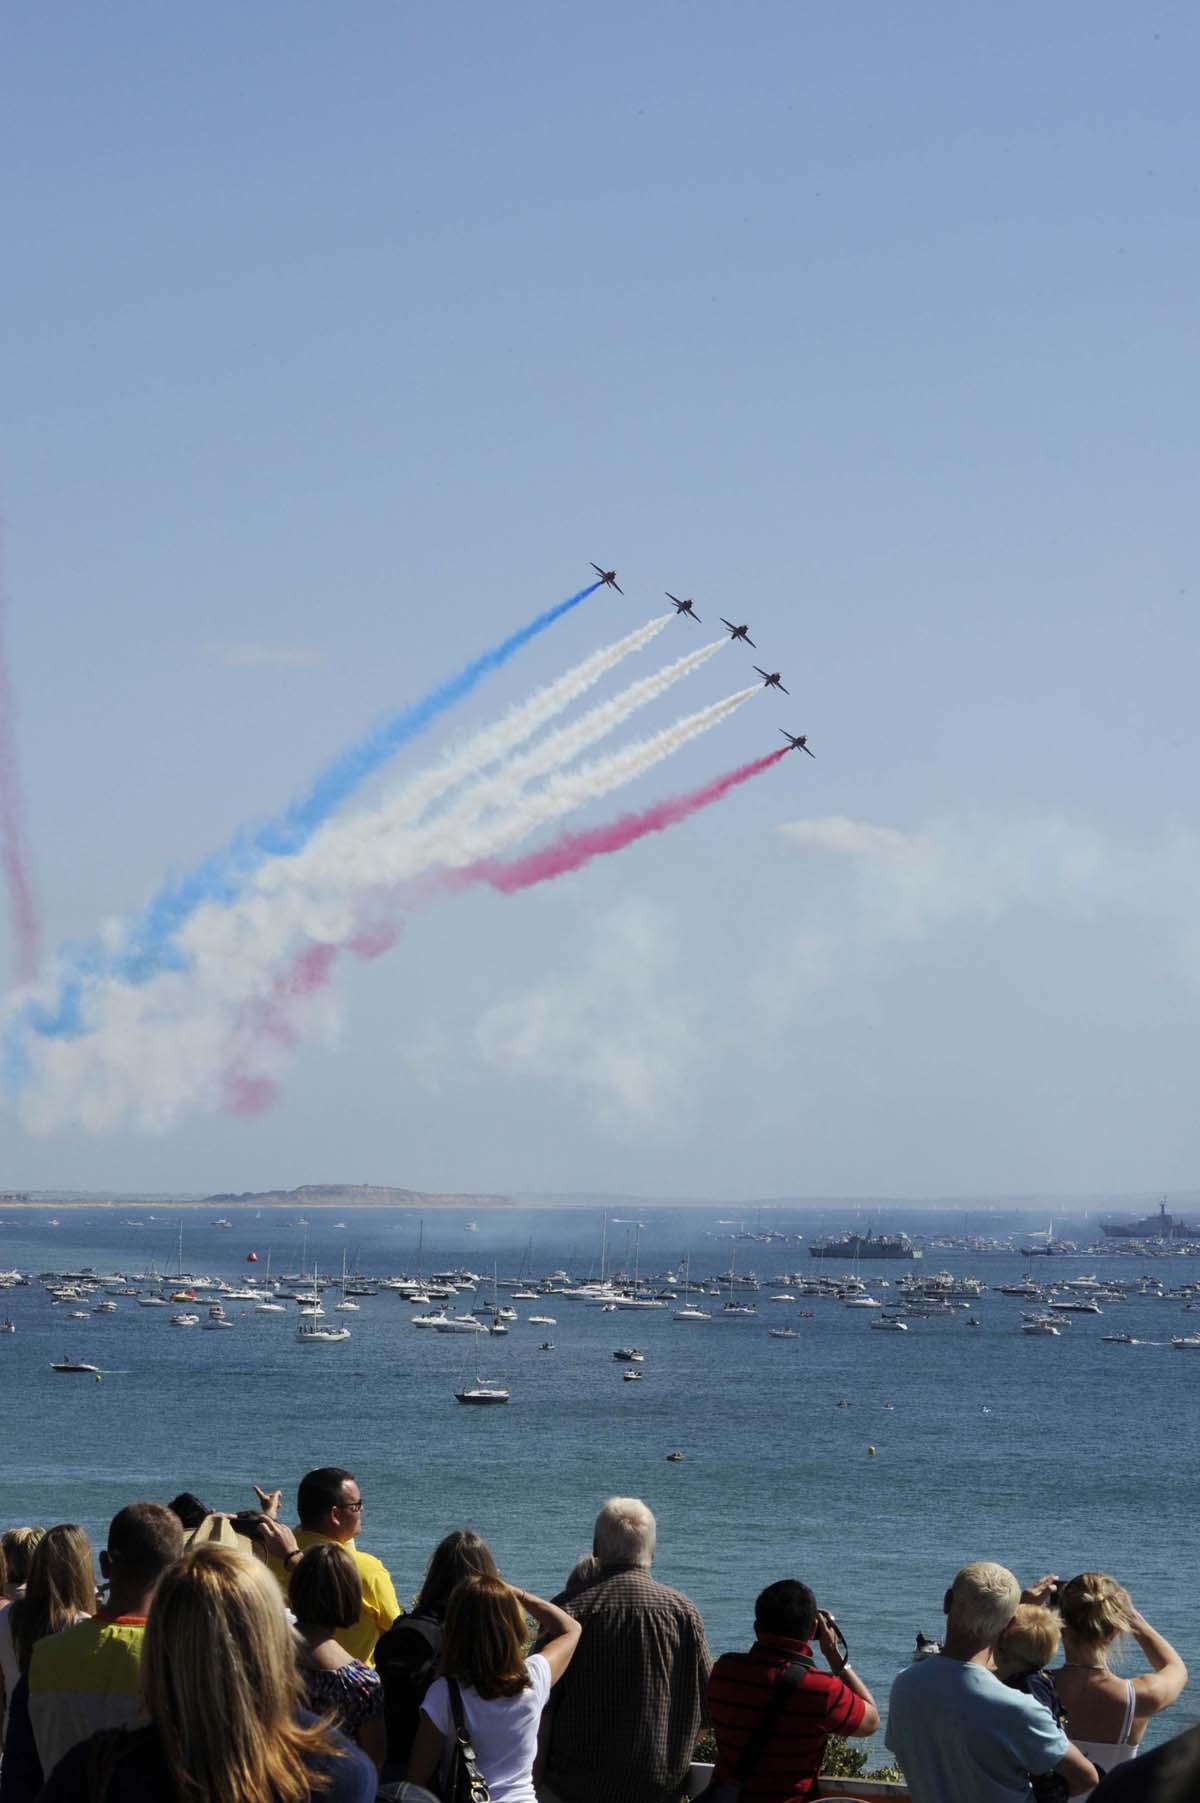 All our pictures of the Bournemouth Air Festival 2013, taken on Saturday, August 31.